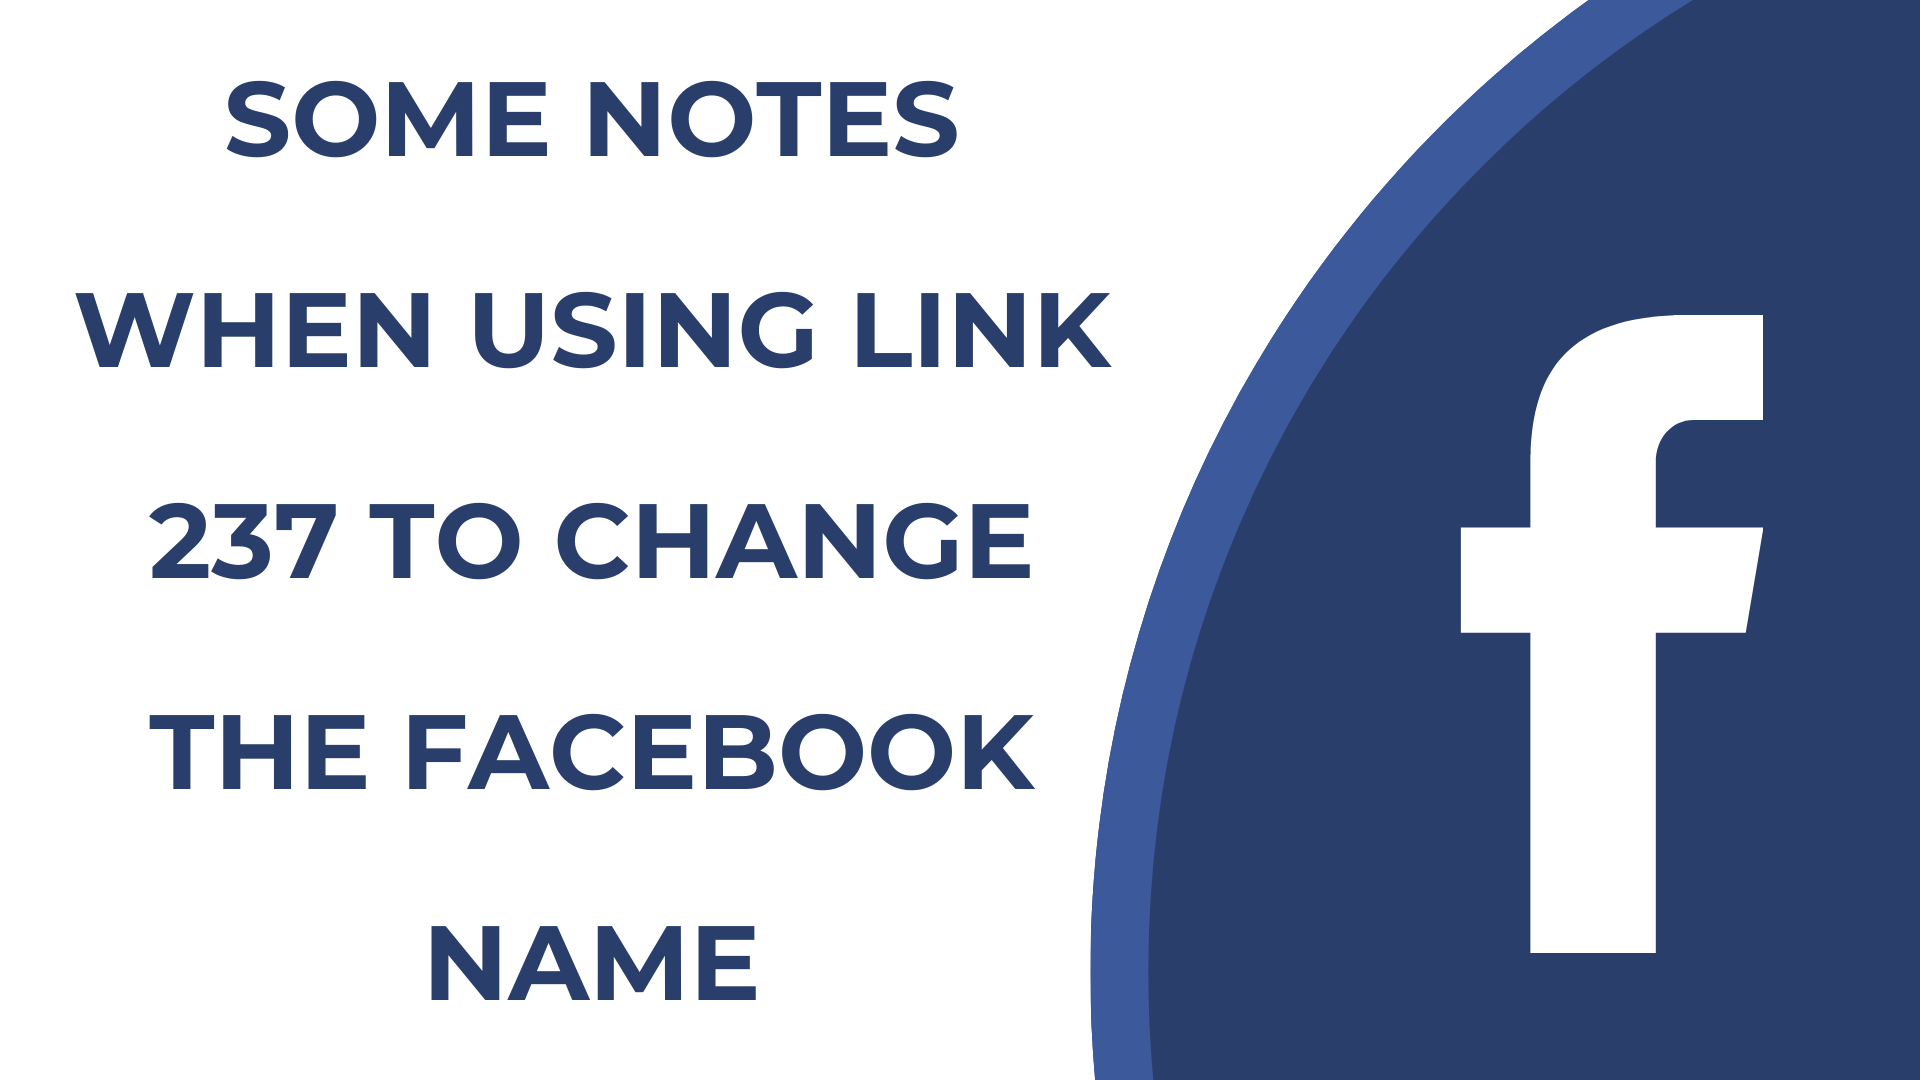 Some notes when using Link 237 to change the Facebook name